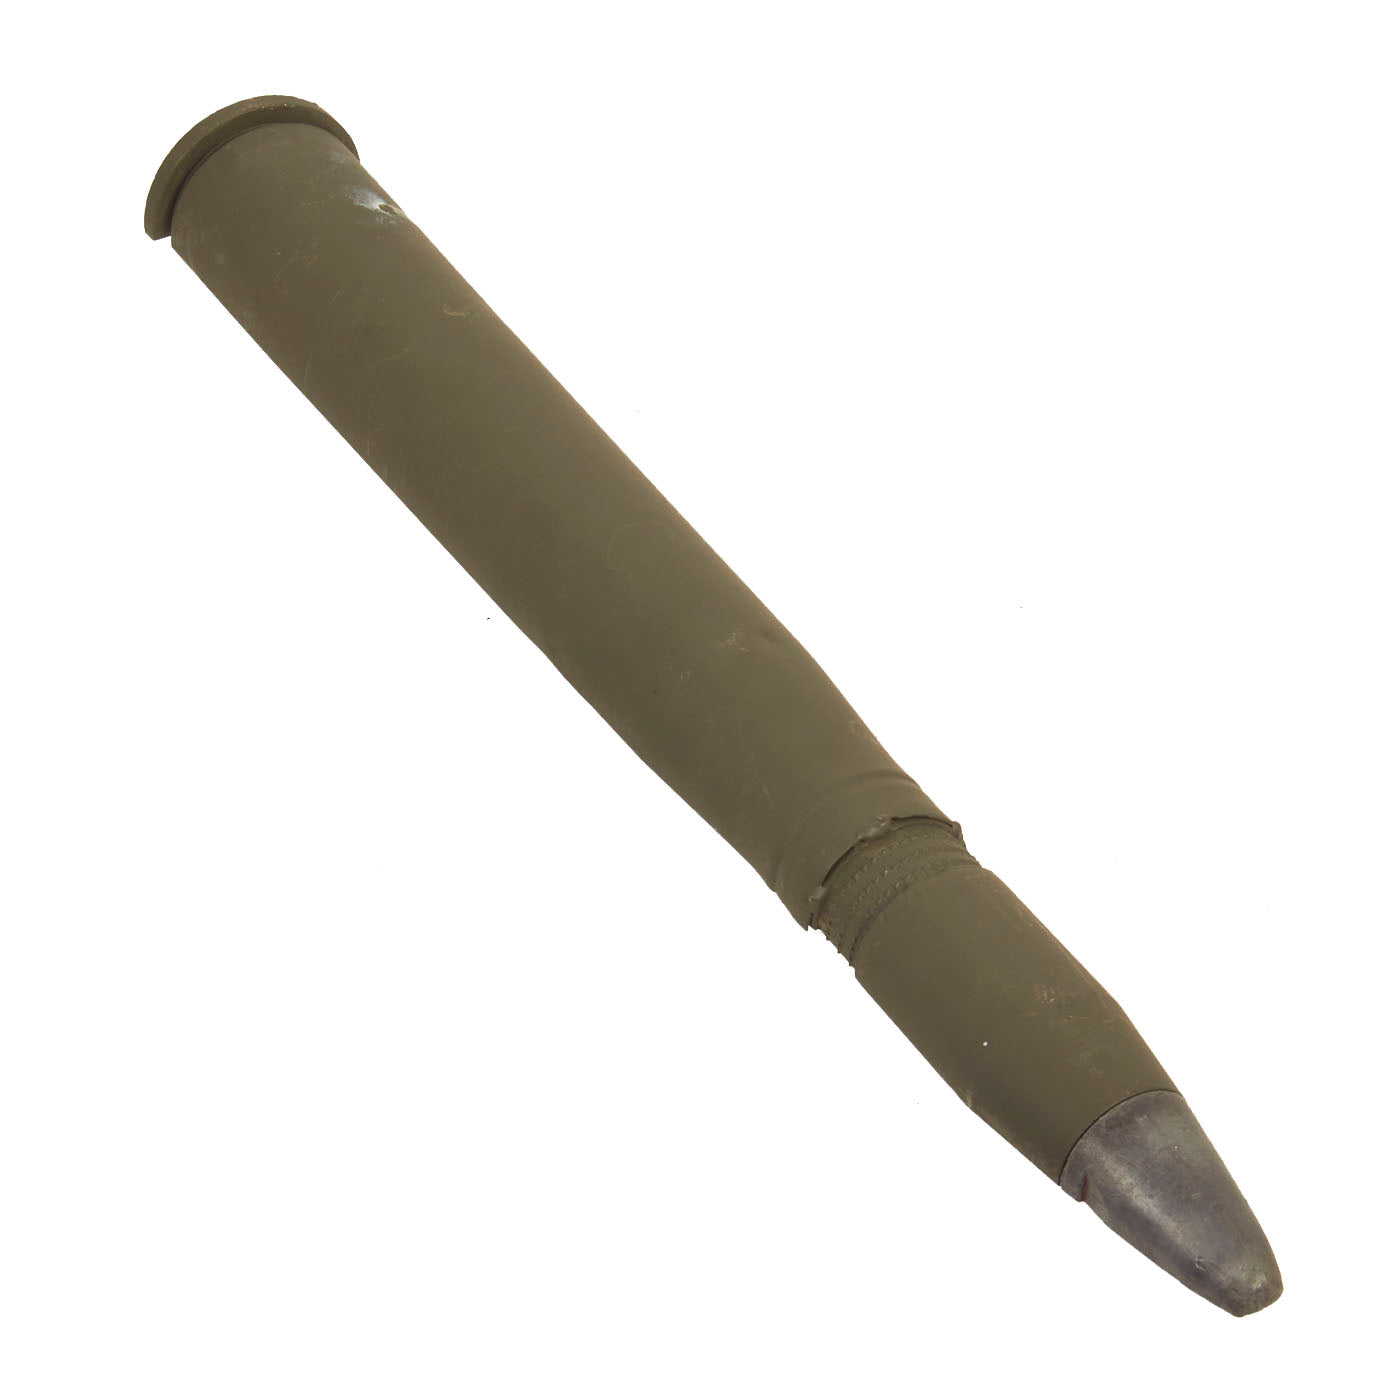 MK-2 40mm Shell > National Museum of the United States Air Force™ > Display